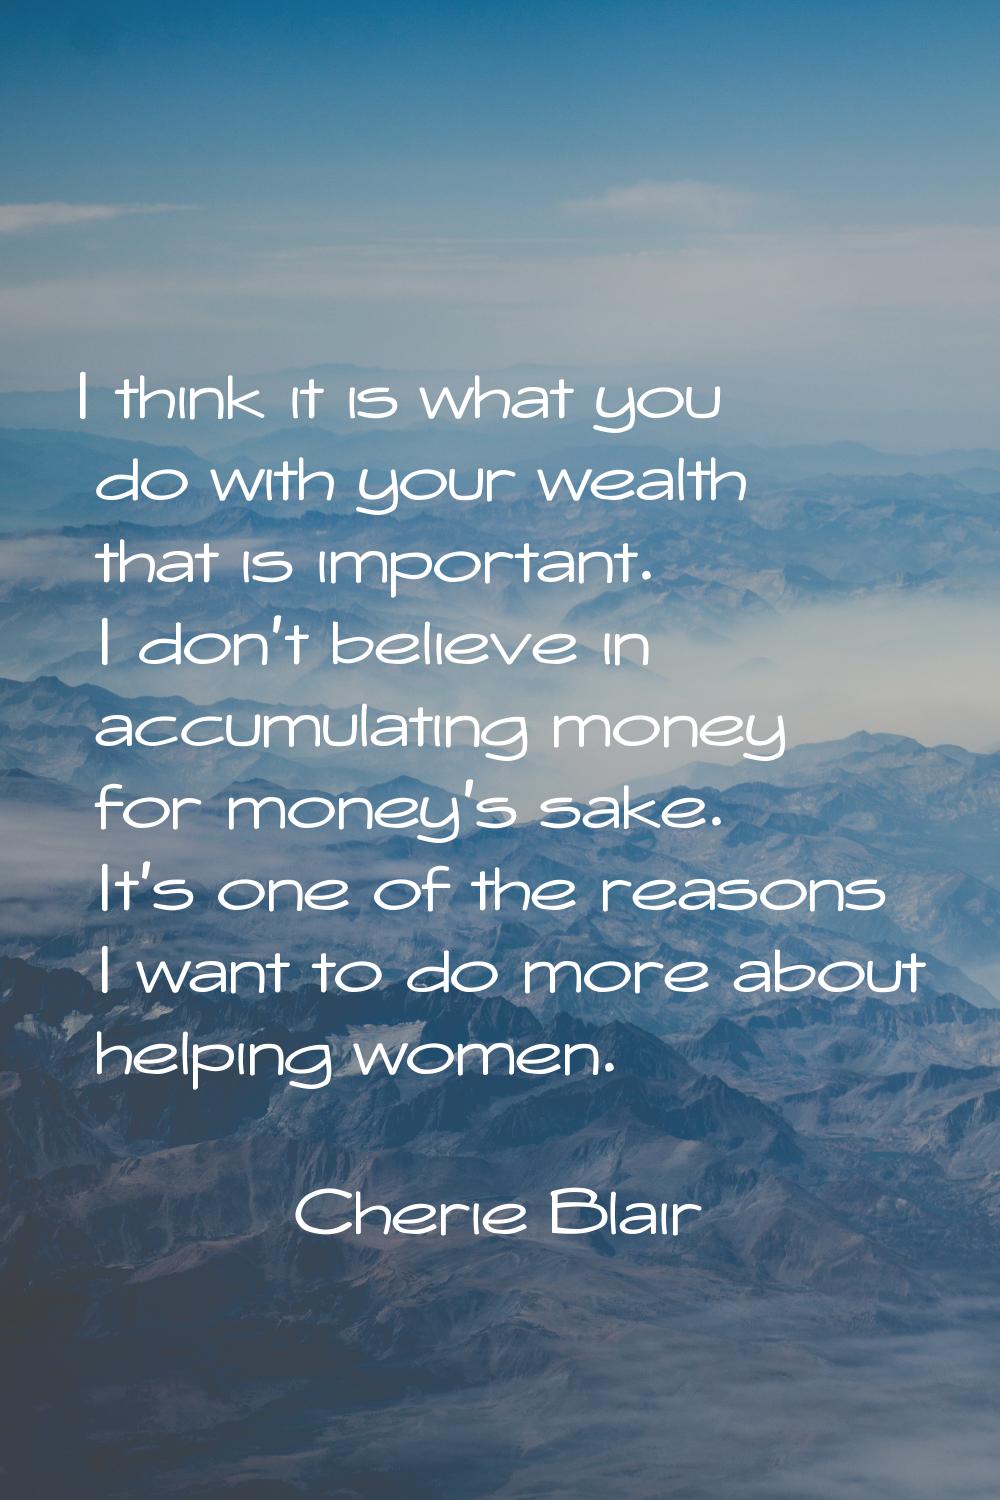 I think it is what you do with your wealth that is important. I don't believe in accumulating money